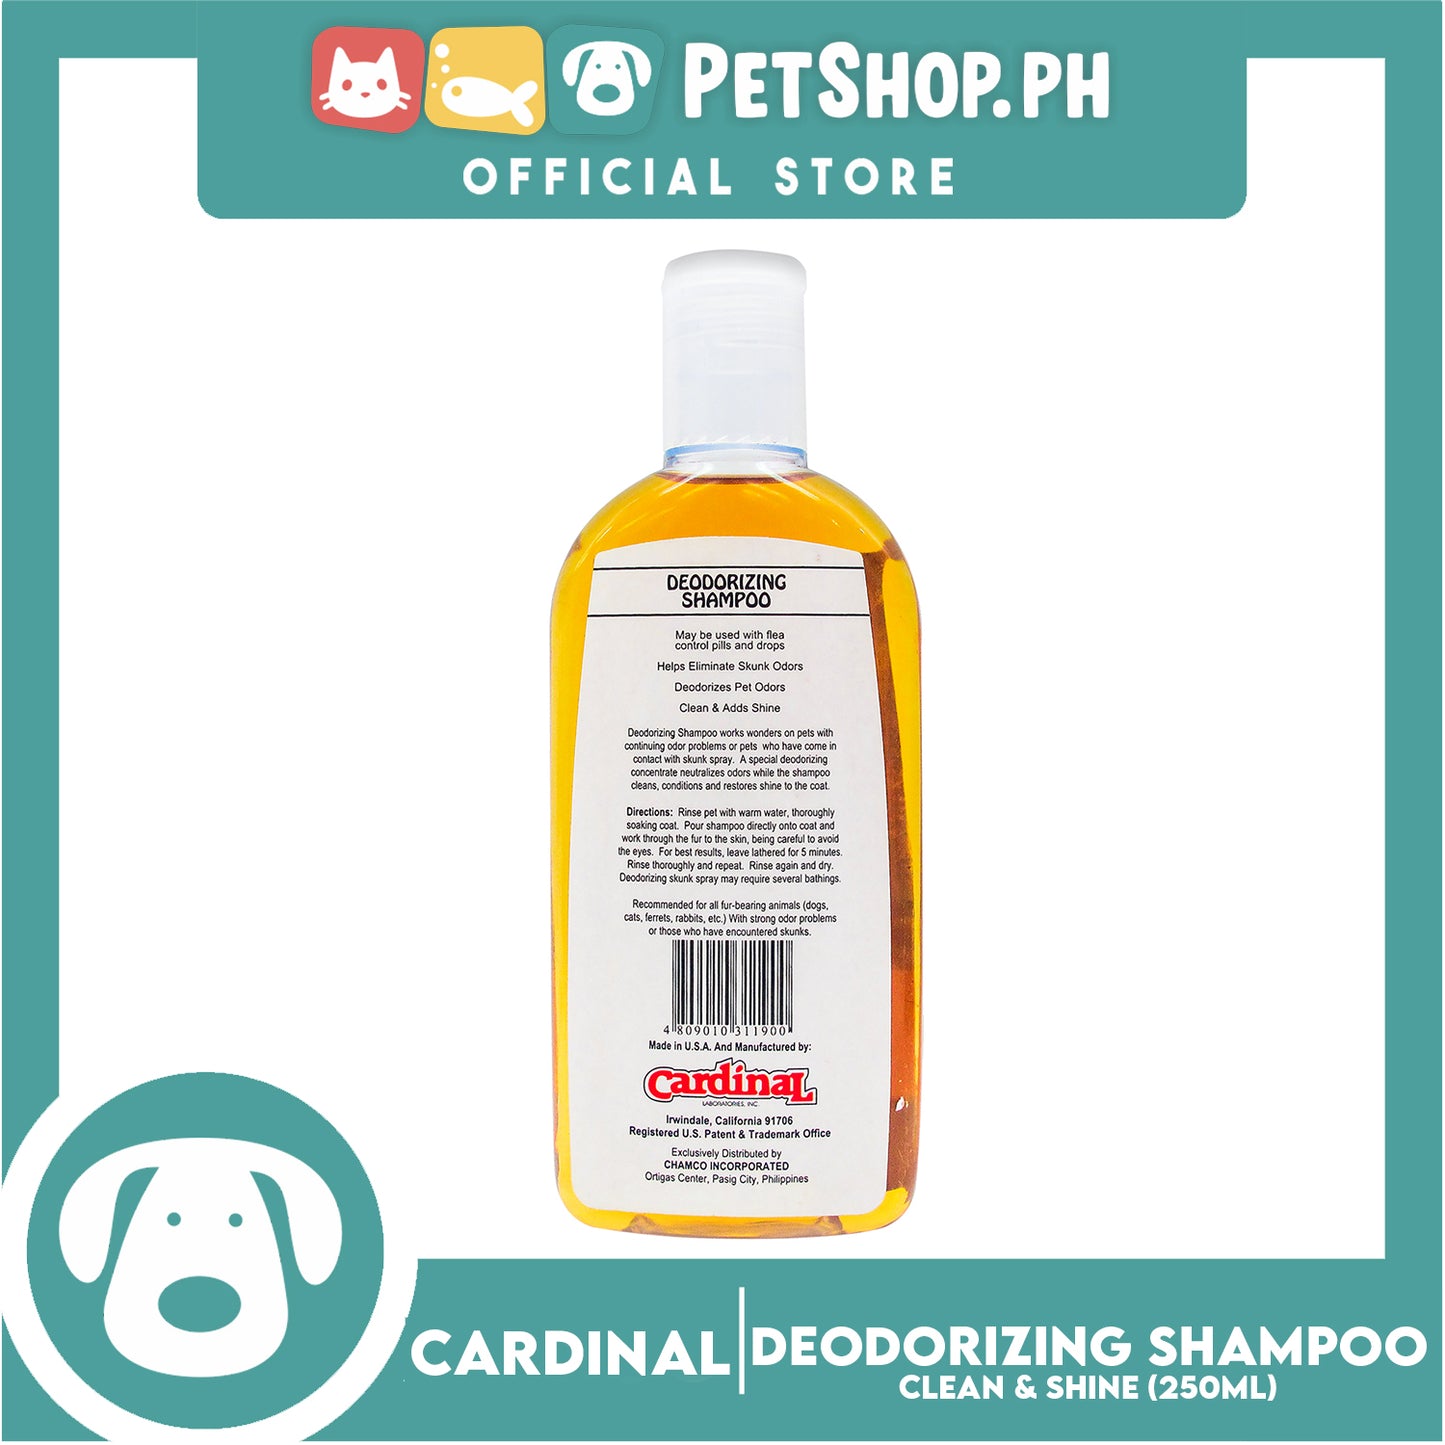 Cardinal Deodorizing Shampoo 250ml For Dogs and Cats